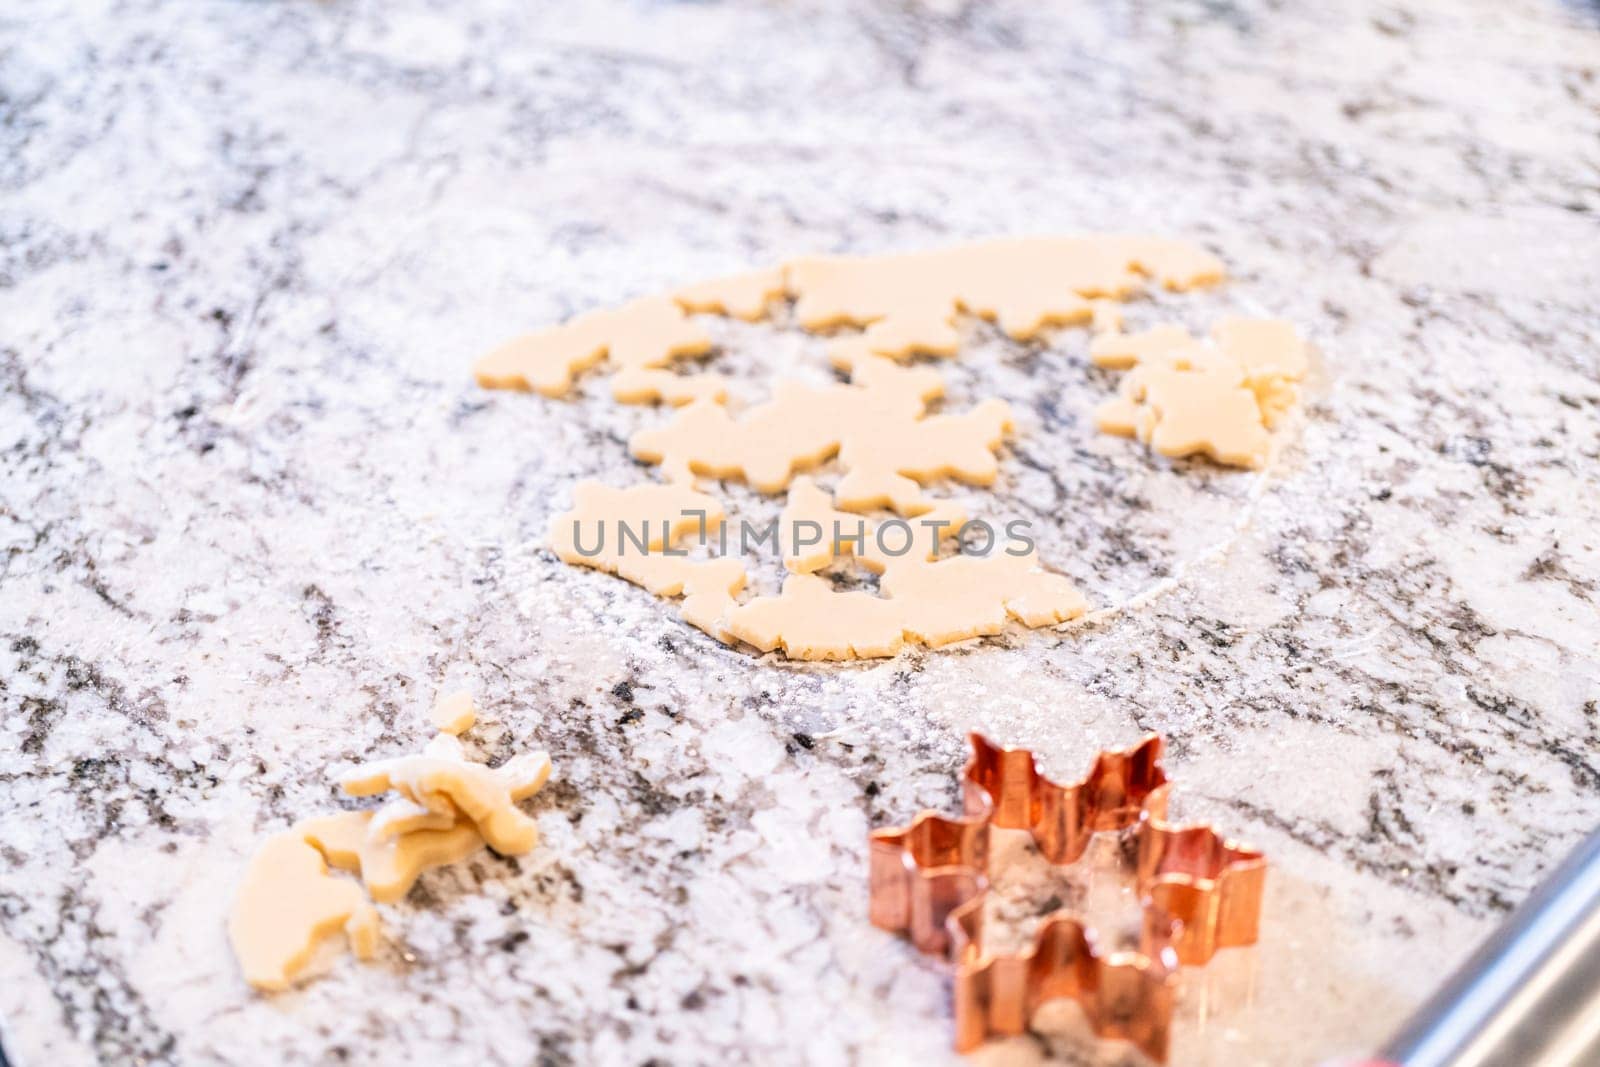 Baking Snowflake-Shaped Sugar Cookies for Homemade Christmas Gifts by arinahabich